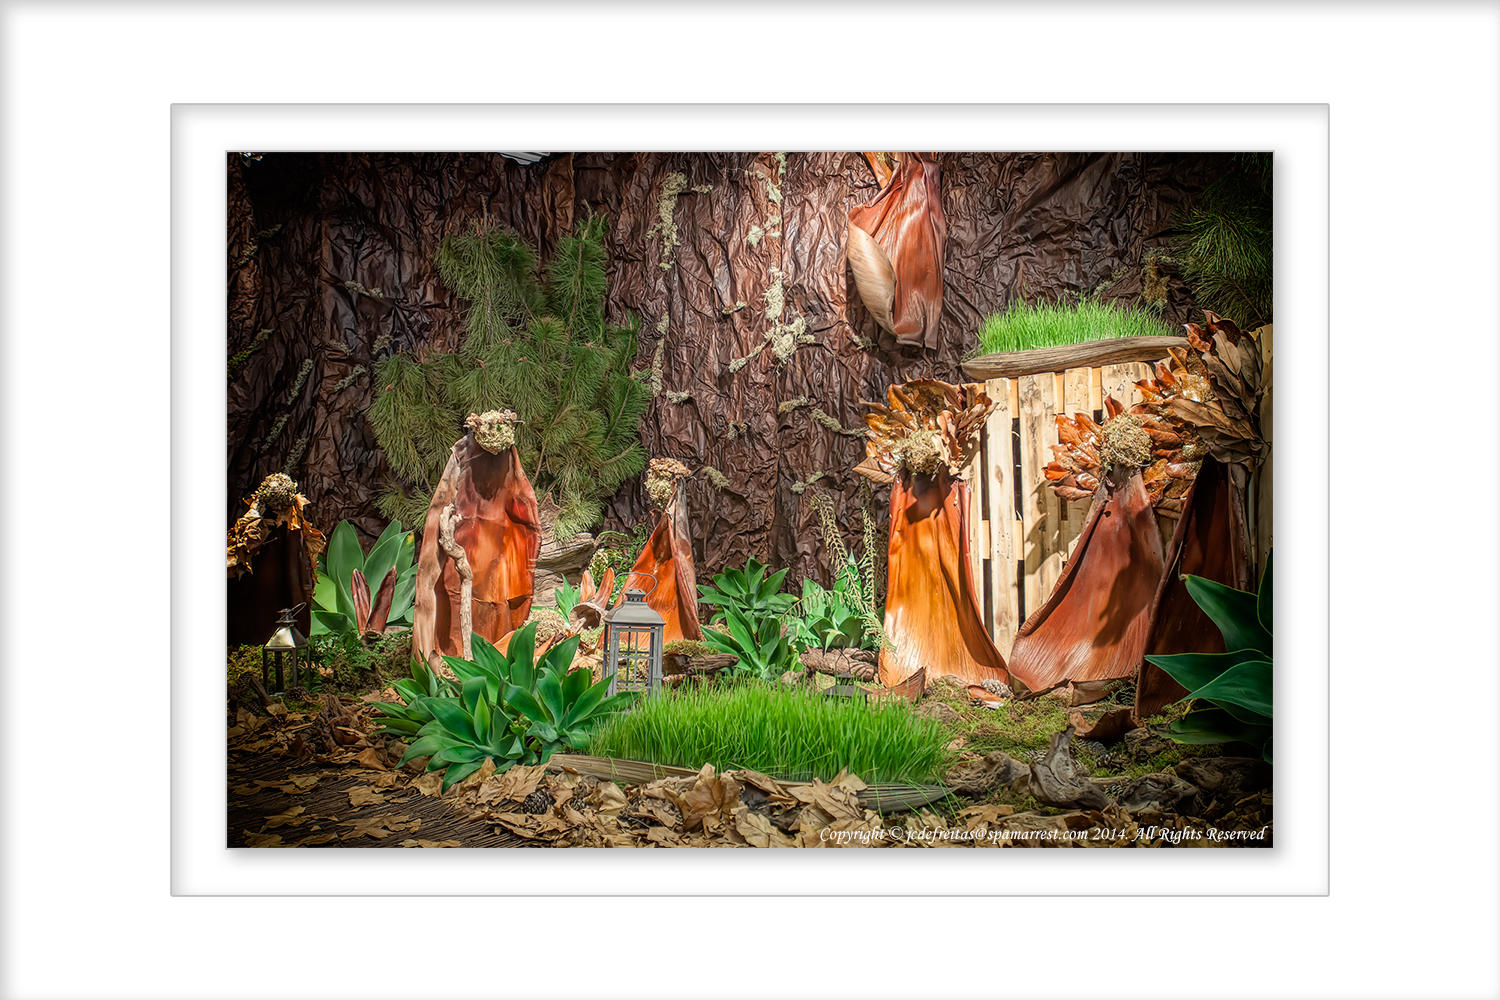 2014 - Nativity made of Plant life - Funchal, Madeira -Portugal